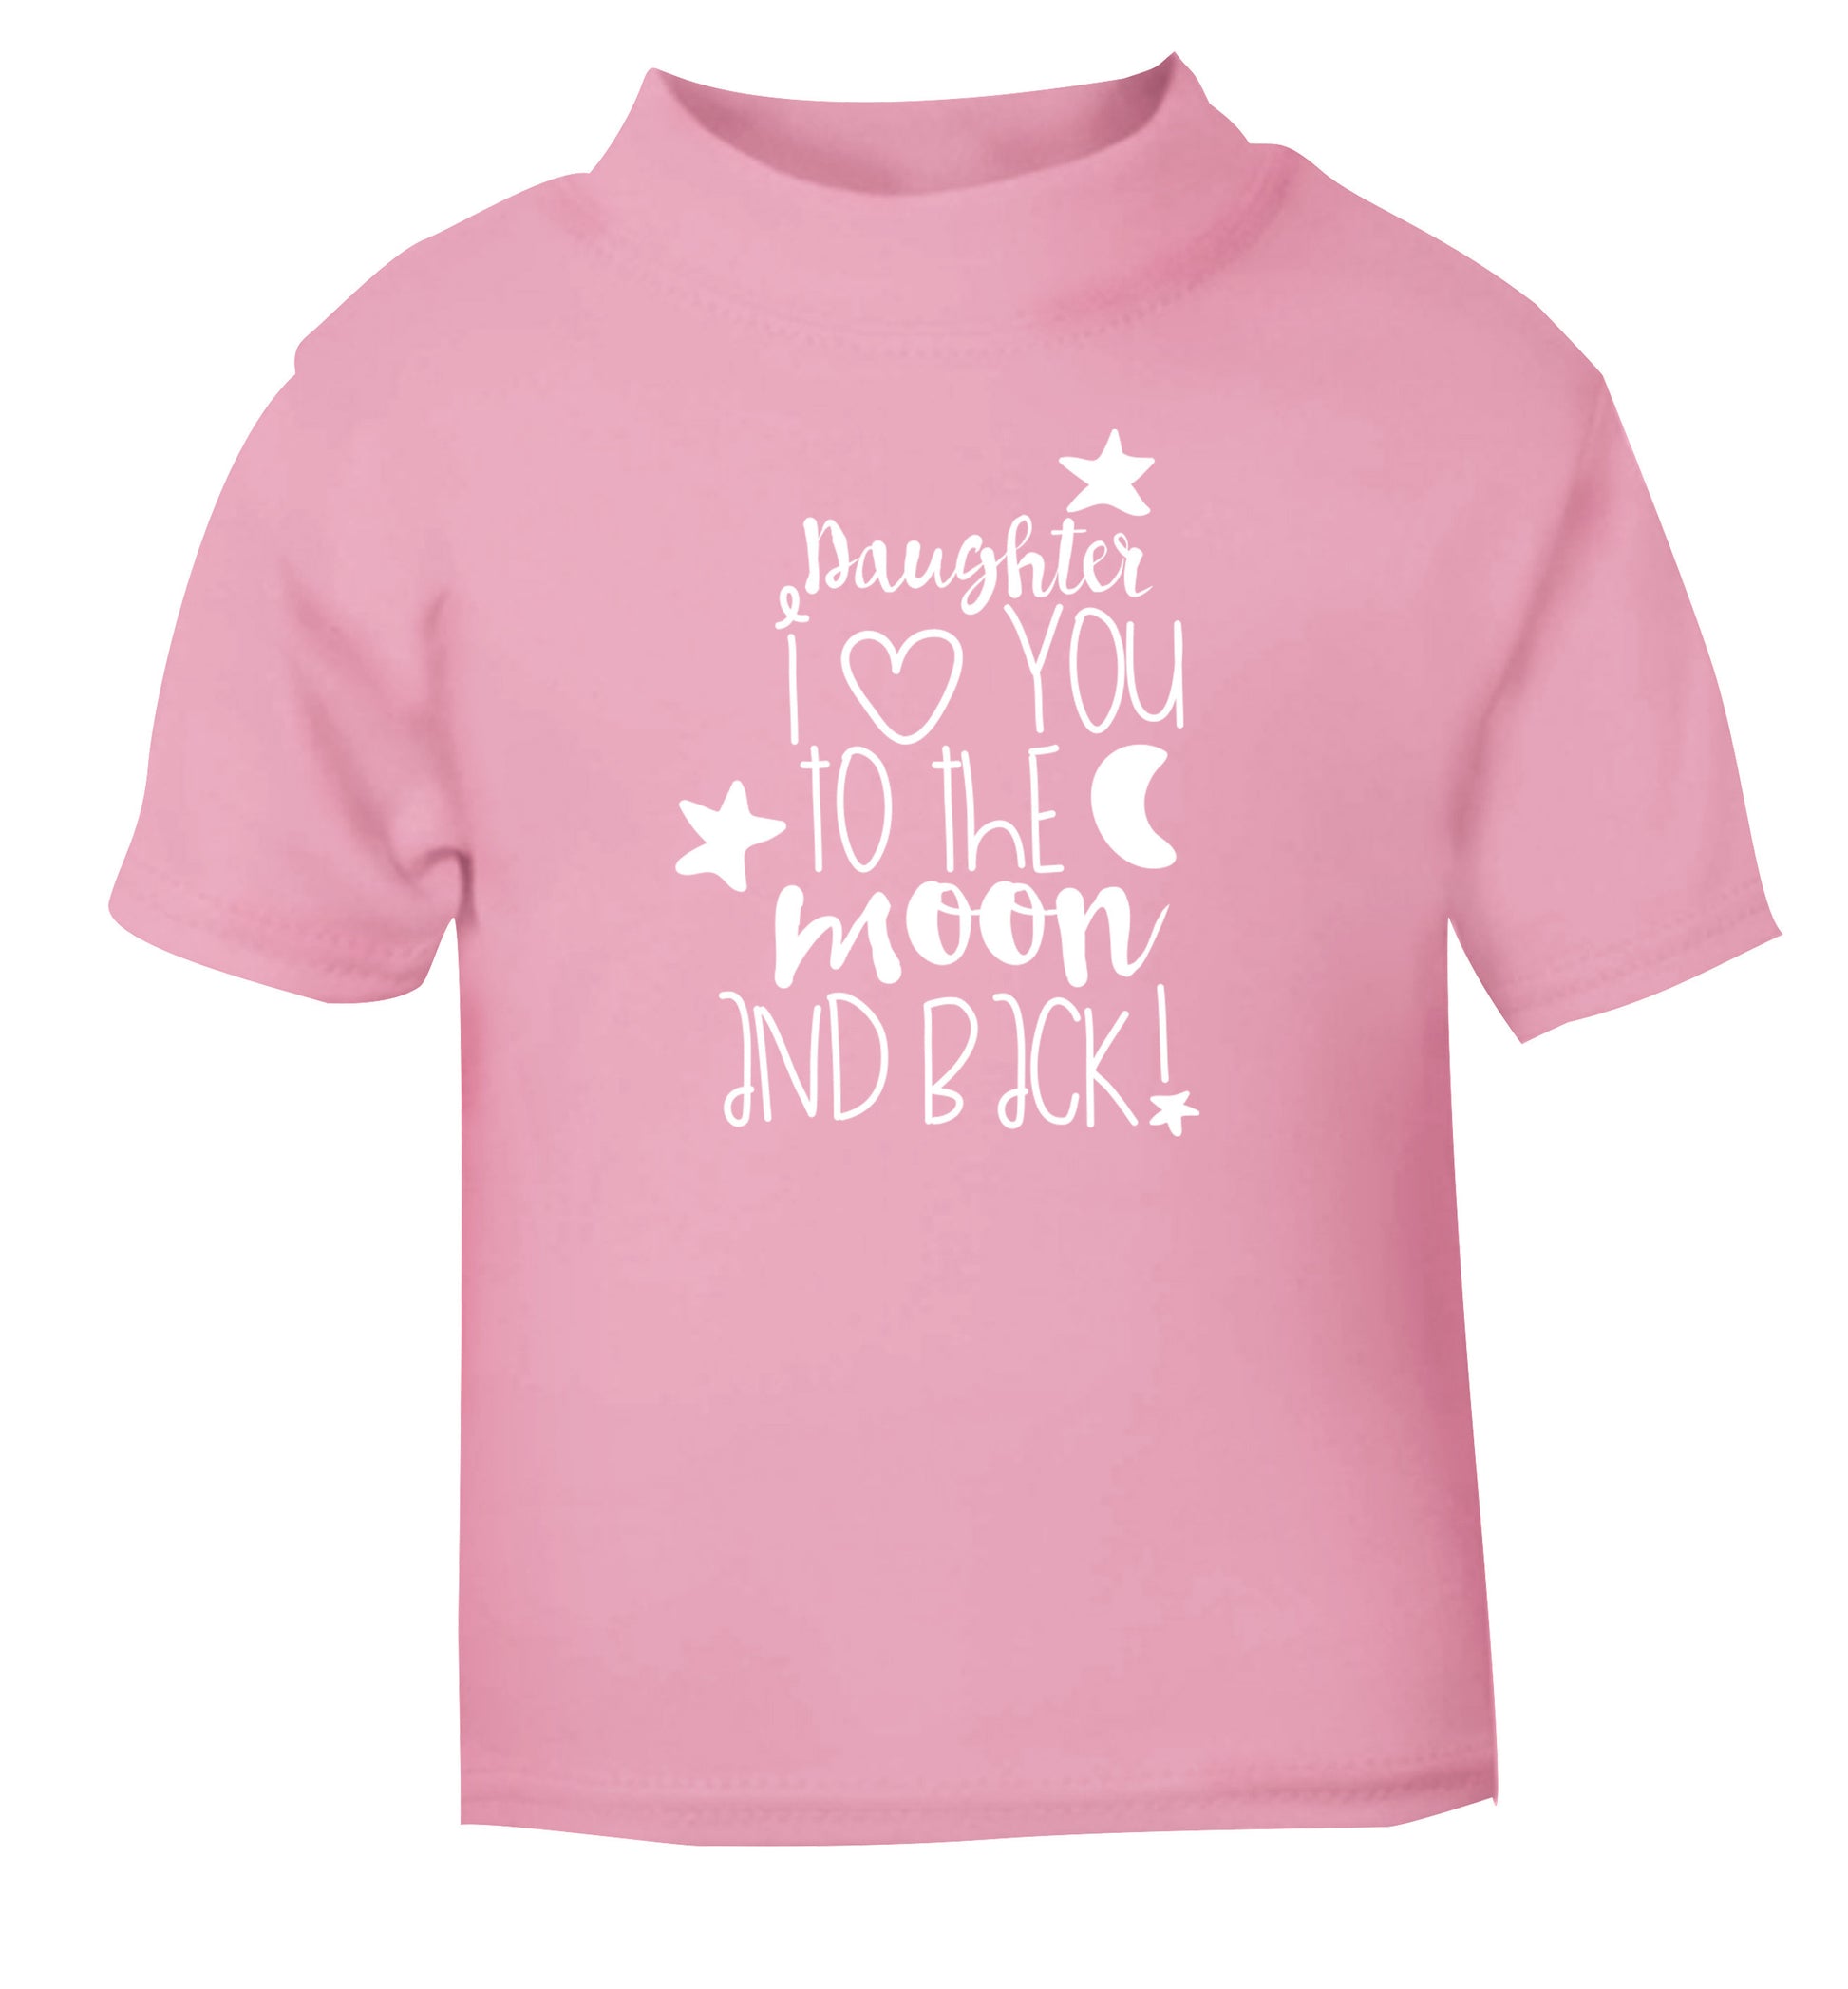 Daughter I love you to the moon and back light pink Baby Toddler Tshirt 2 Years